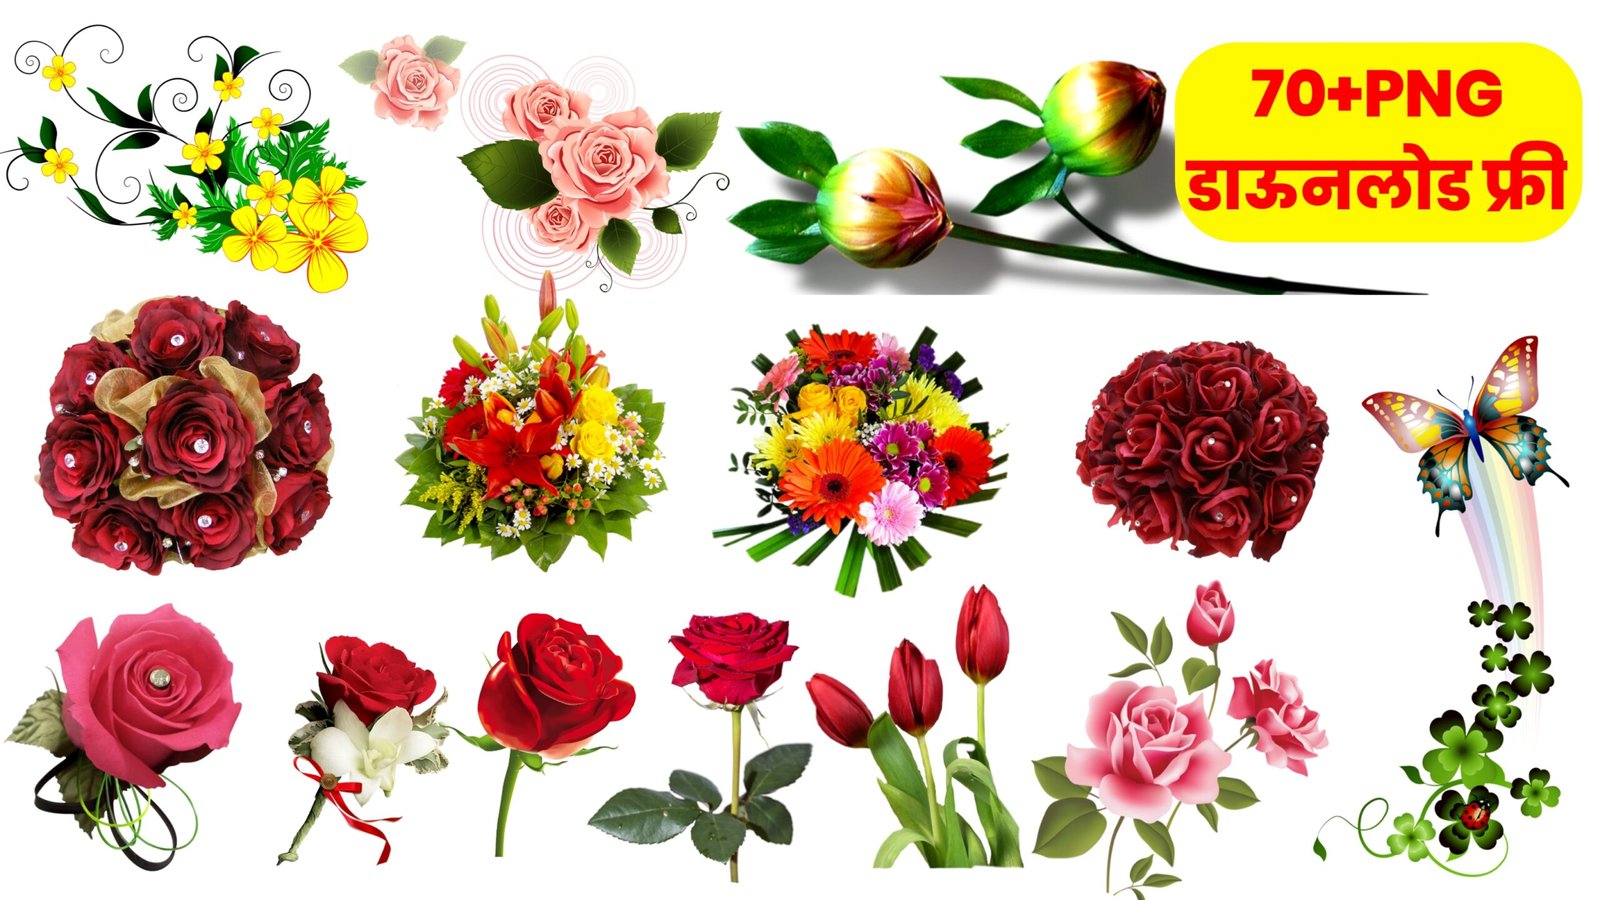 Flowers png download kare|flowers clipart png download|phool png download kare free|